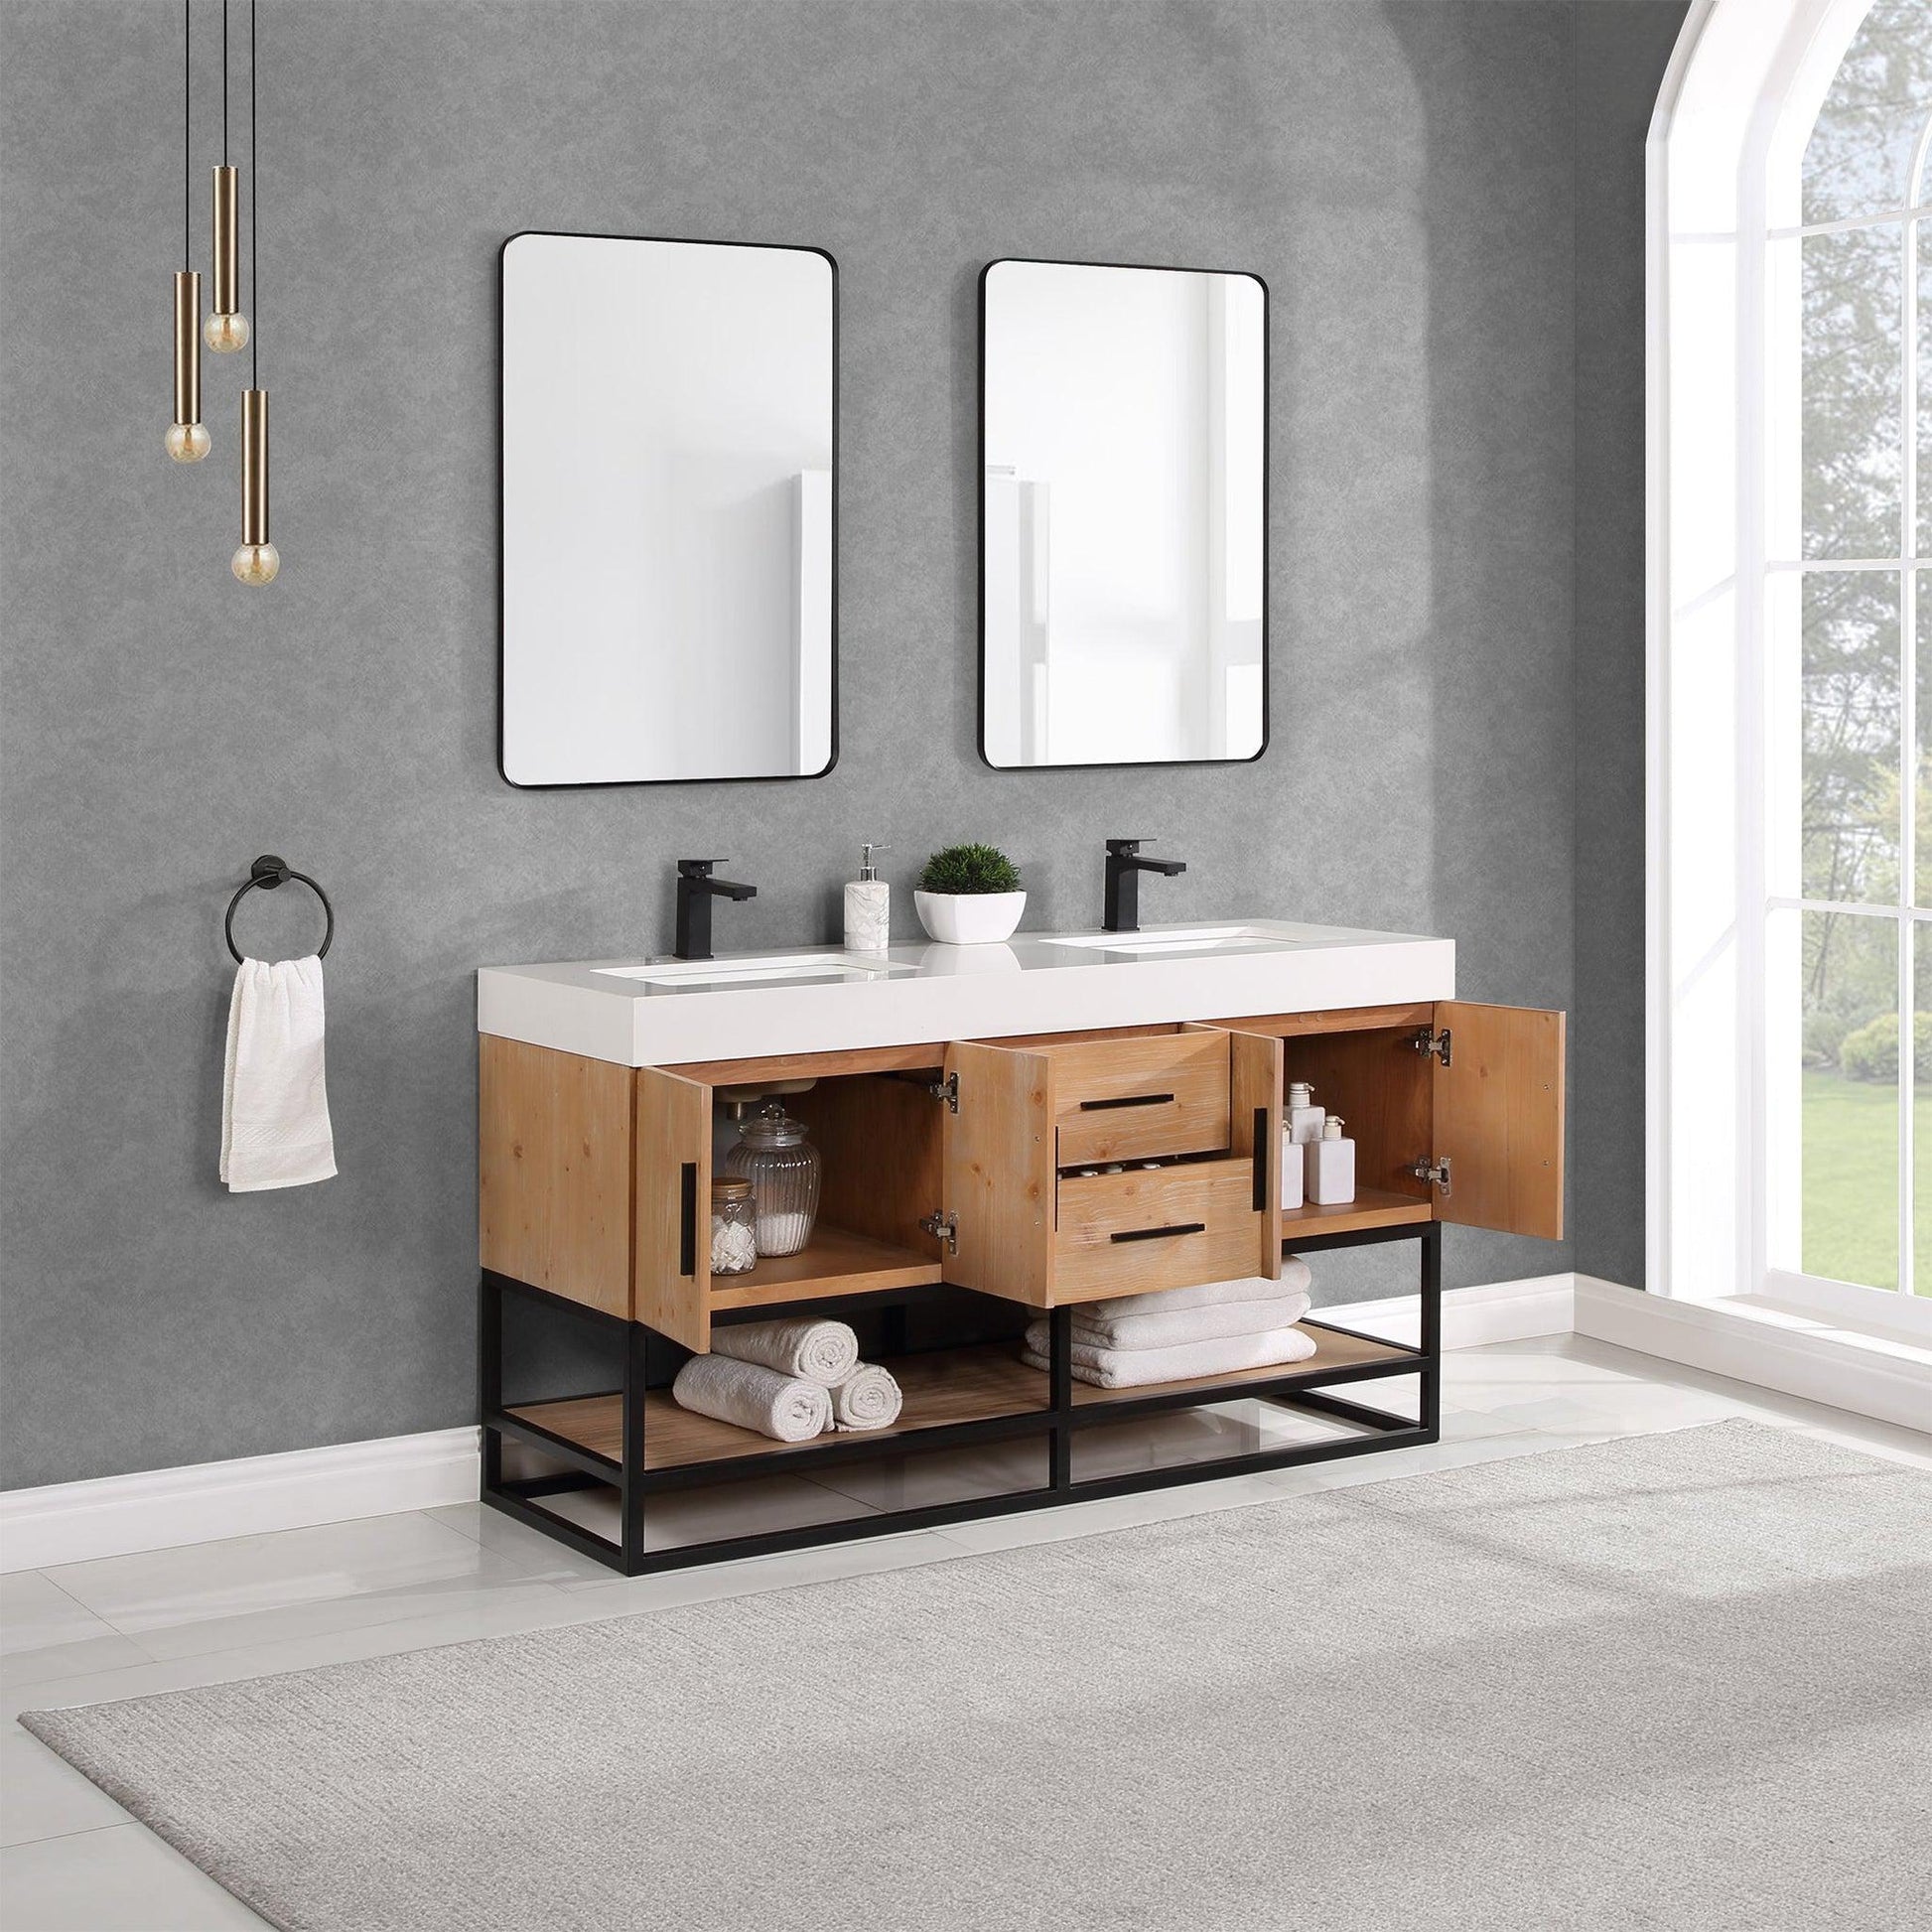 Altair Bianco 60" Light Brown Freestanding Double Bathroom Vanity Set With Matte Black Support Base, Mirror, White Composite Stone Top, Two Rectangular Undermount Ceramic Sinks, and Overflow